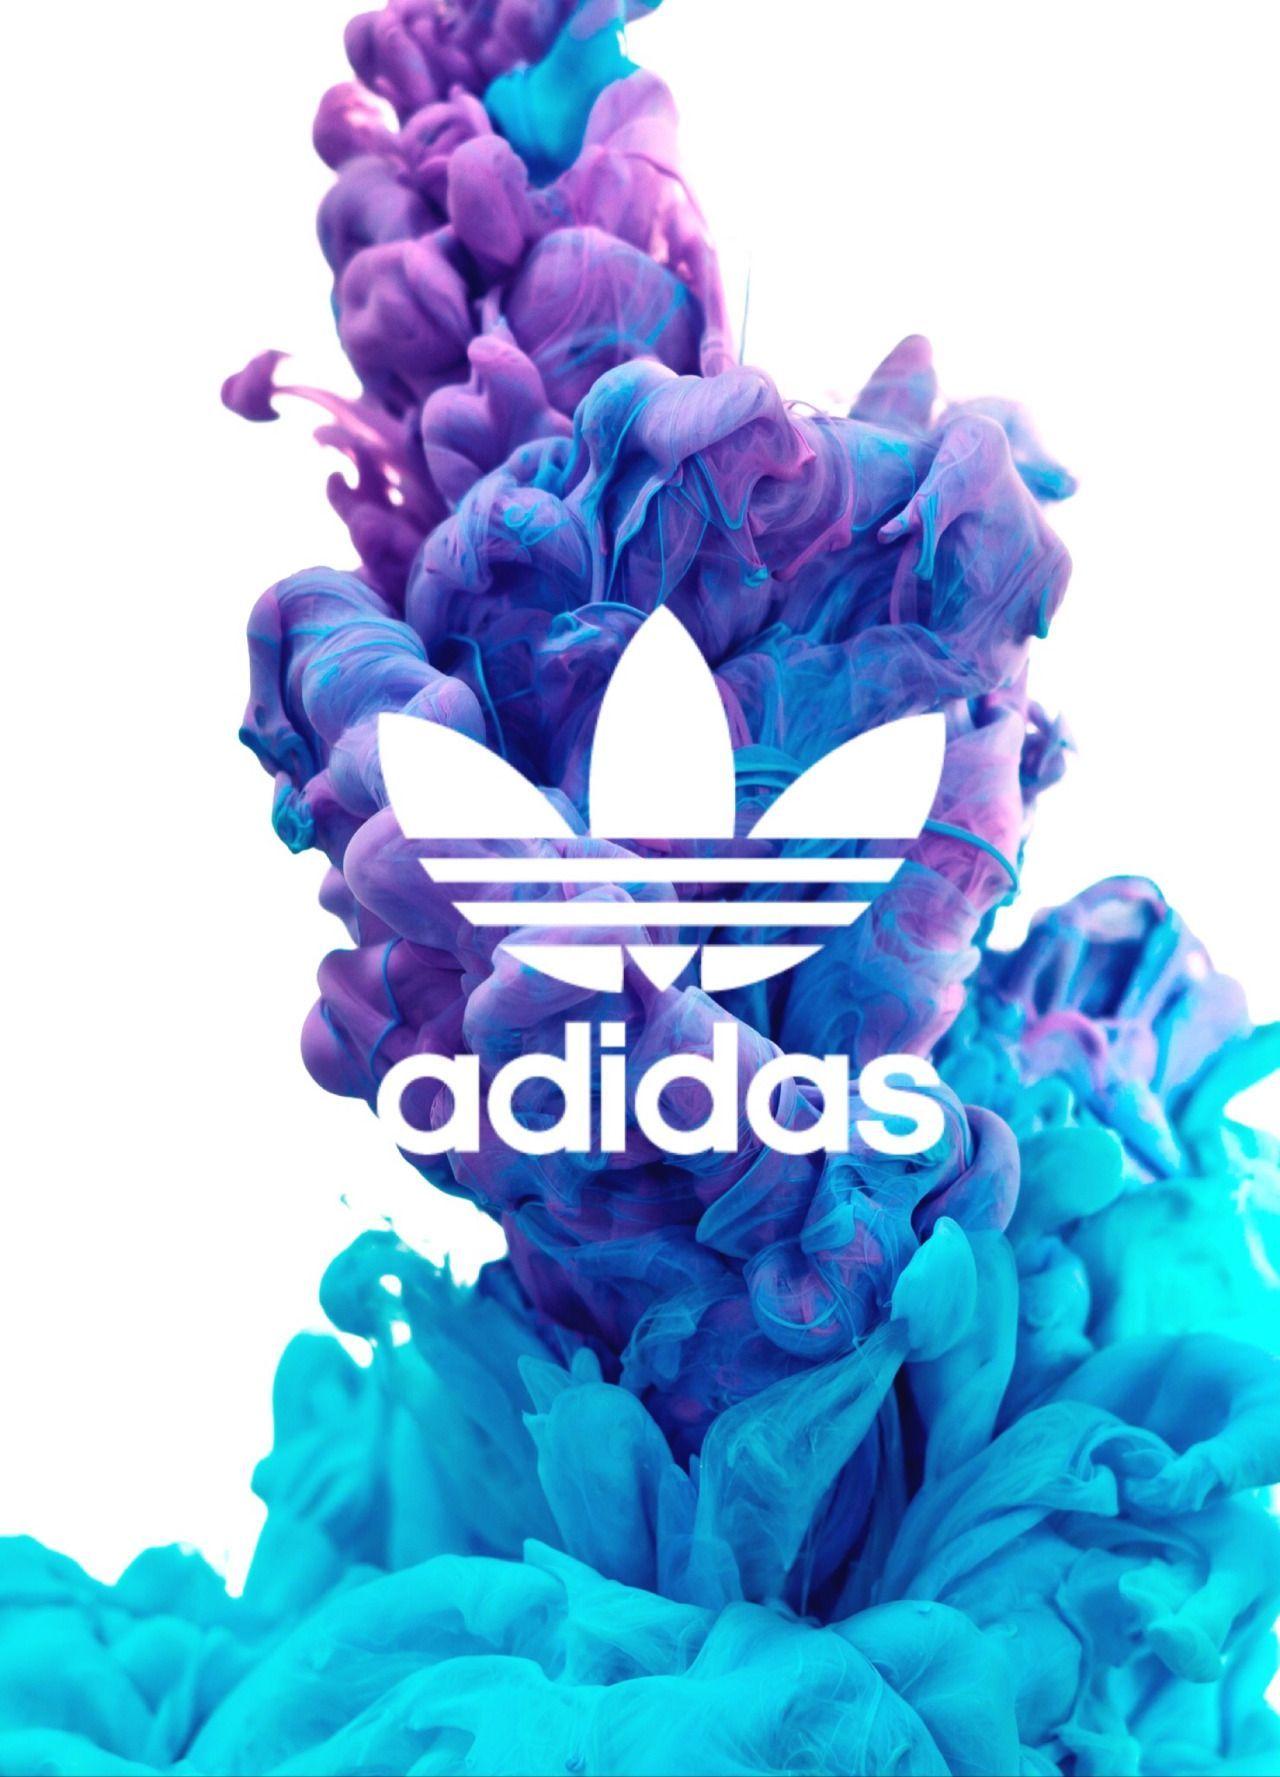 $29 on. Adidas, Wallpaper and Phone